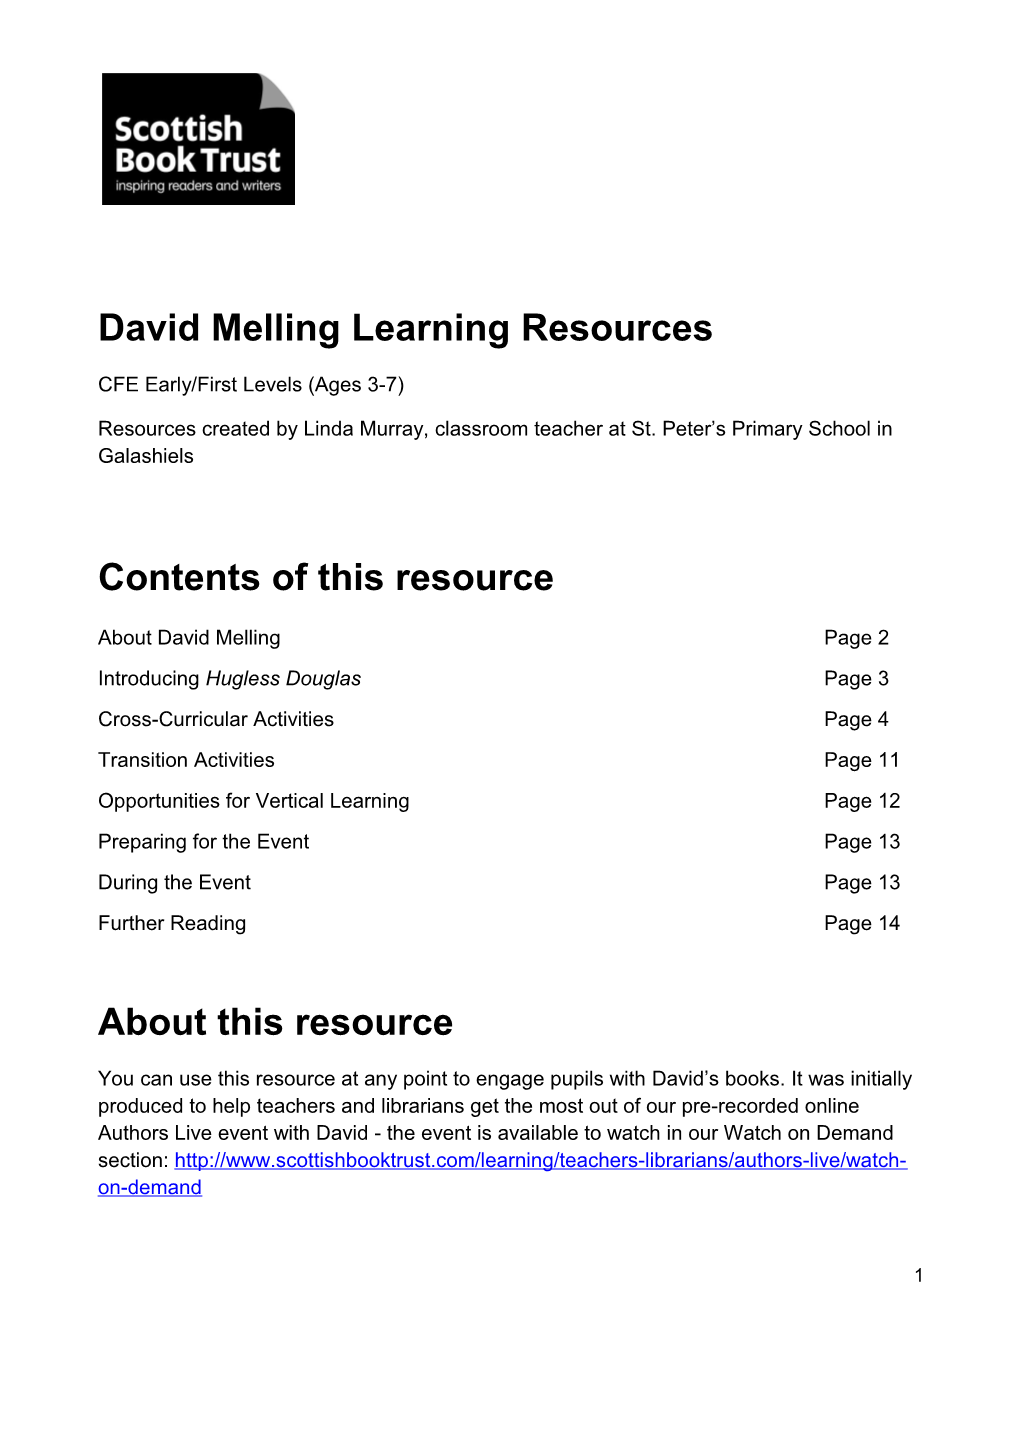 David Melling Learning Resources